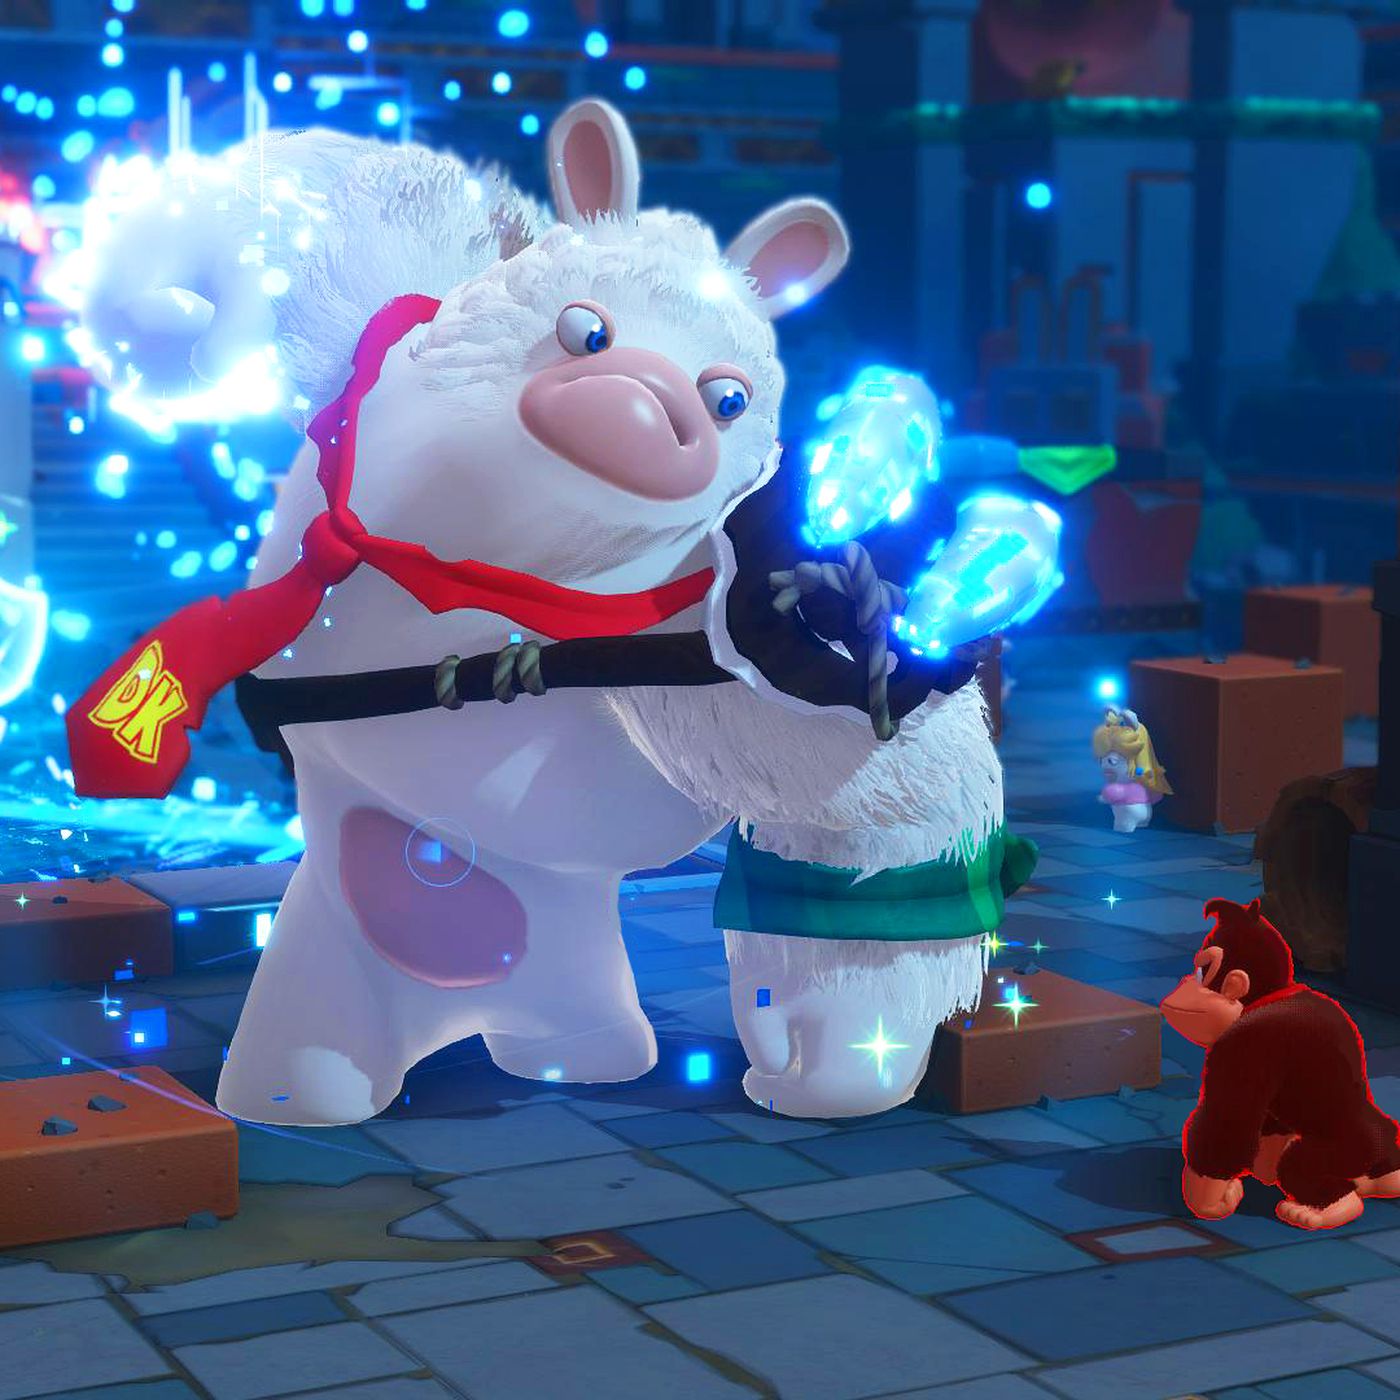 Donkey kong adventure is a lot more mario rabbids for better and worse